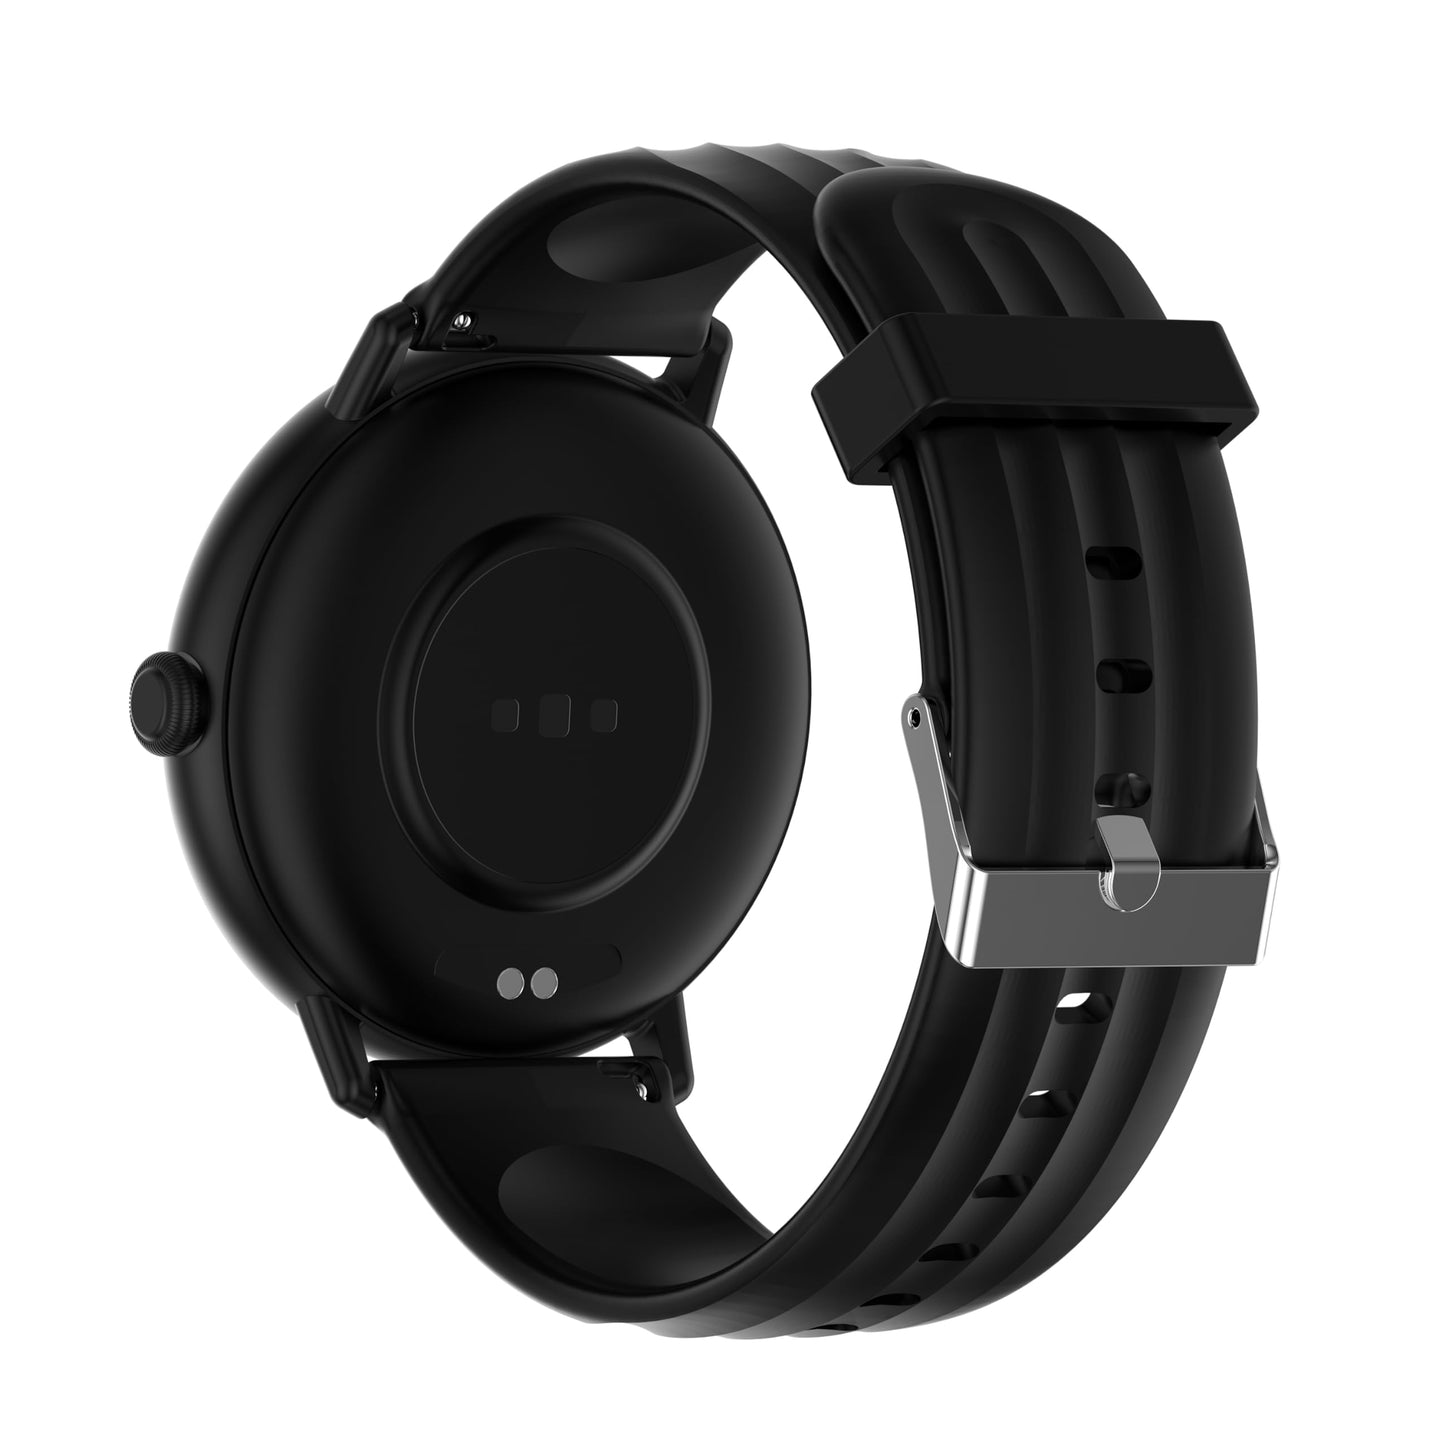 FCUK New Tide Smart Watch|1.39" Round Display| 360x360 High Resolution |SingleSync BT Calling|Built-in AI Voice Assistant| Premium Textured Straps|Upto 5 Day Battery|120+ Sports Modes